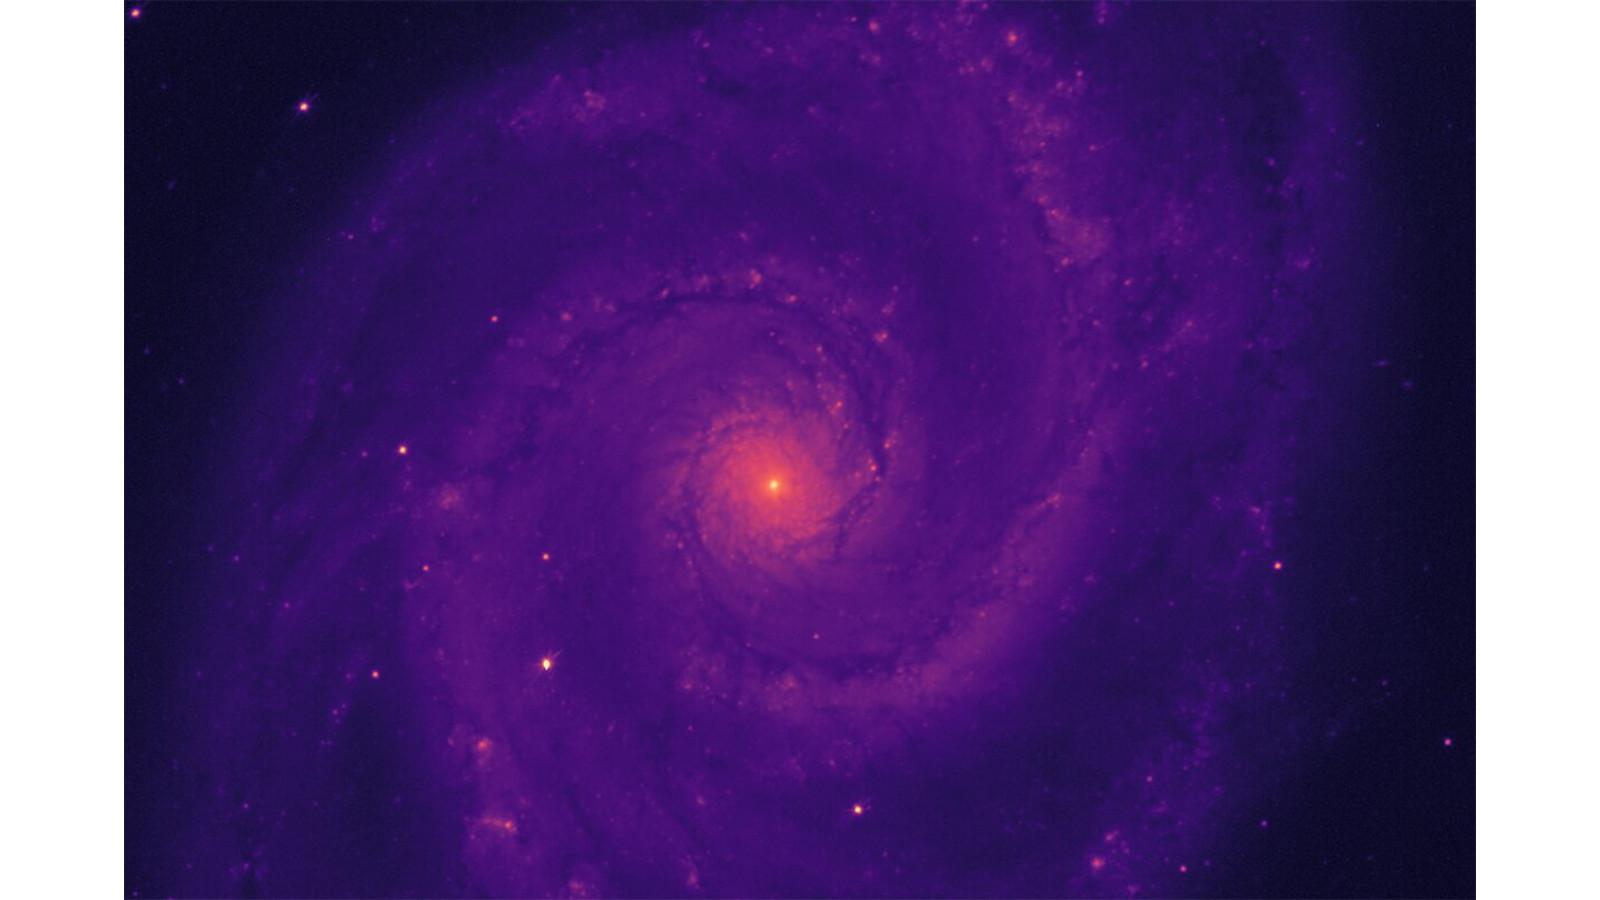 DESI Commissioning Instrument CCD camera first-light image of galaxy M51